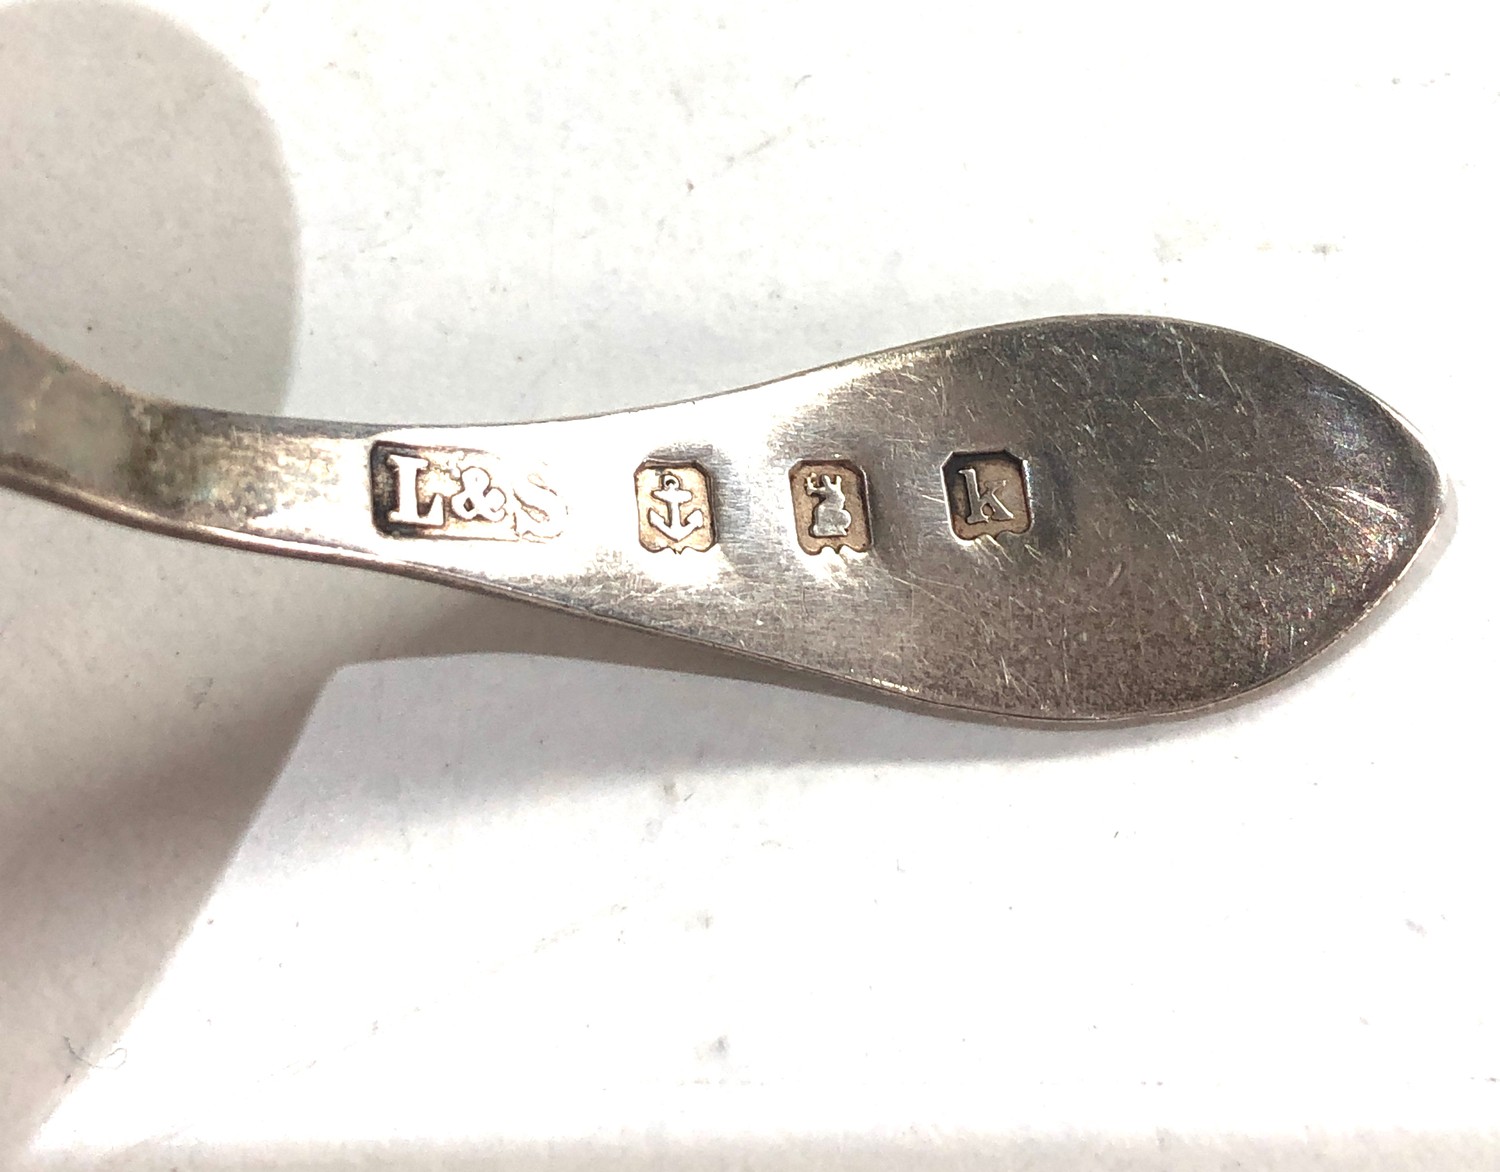 2 antique silver caddy spoons - Image 3 of 4